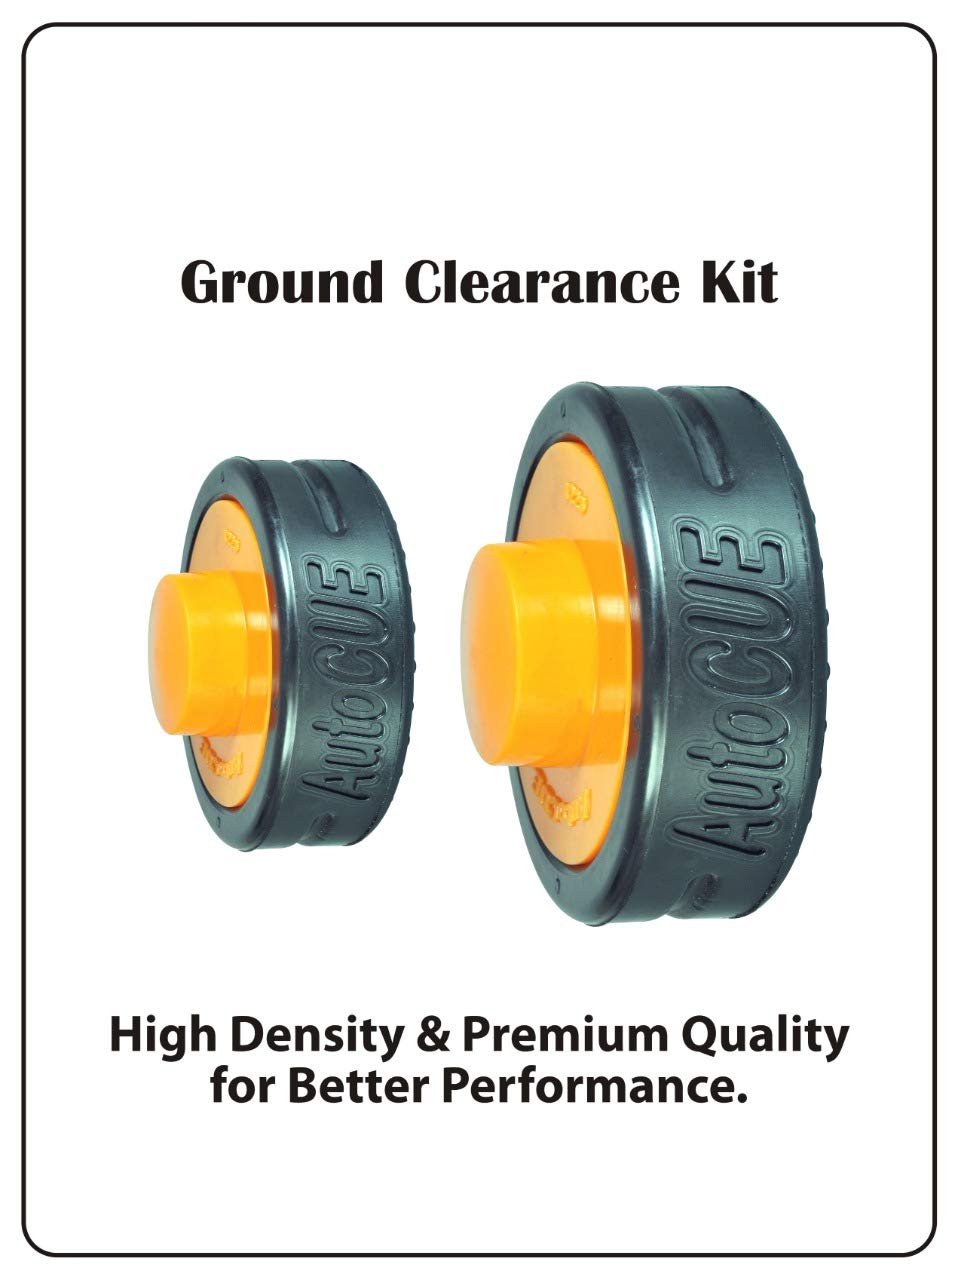 AutoCue Ground Clearance Kit Sizes -  A | B | C | D